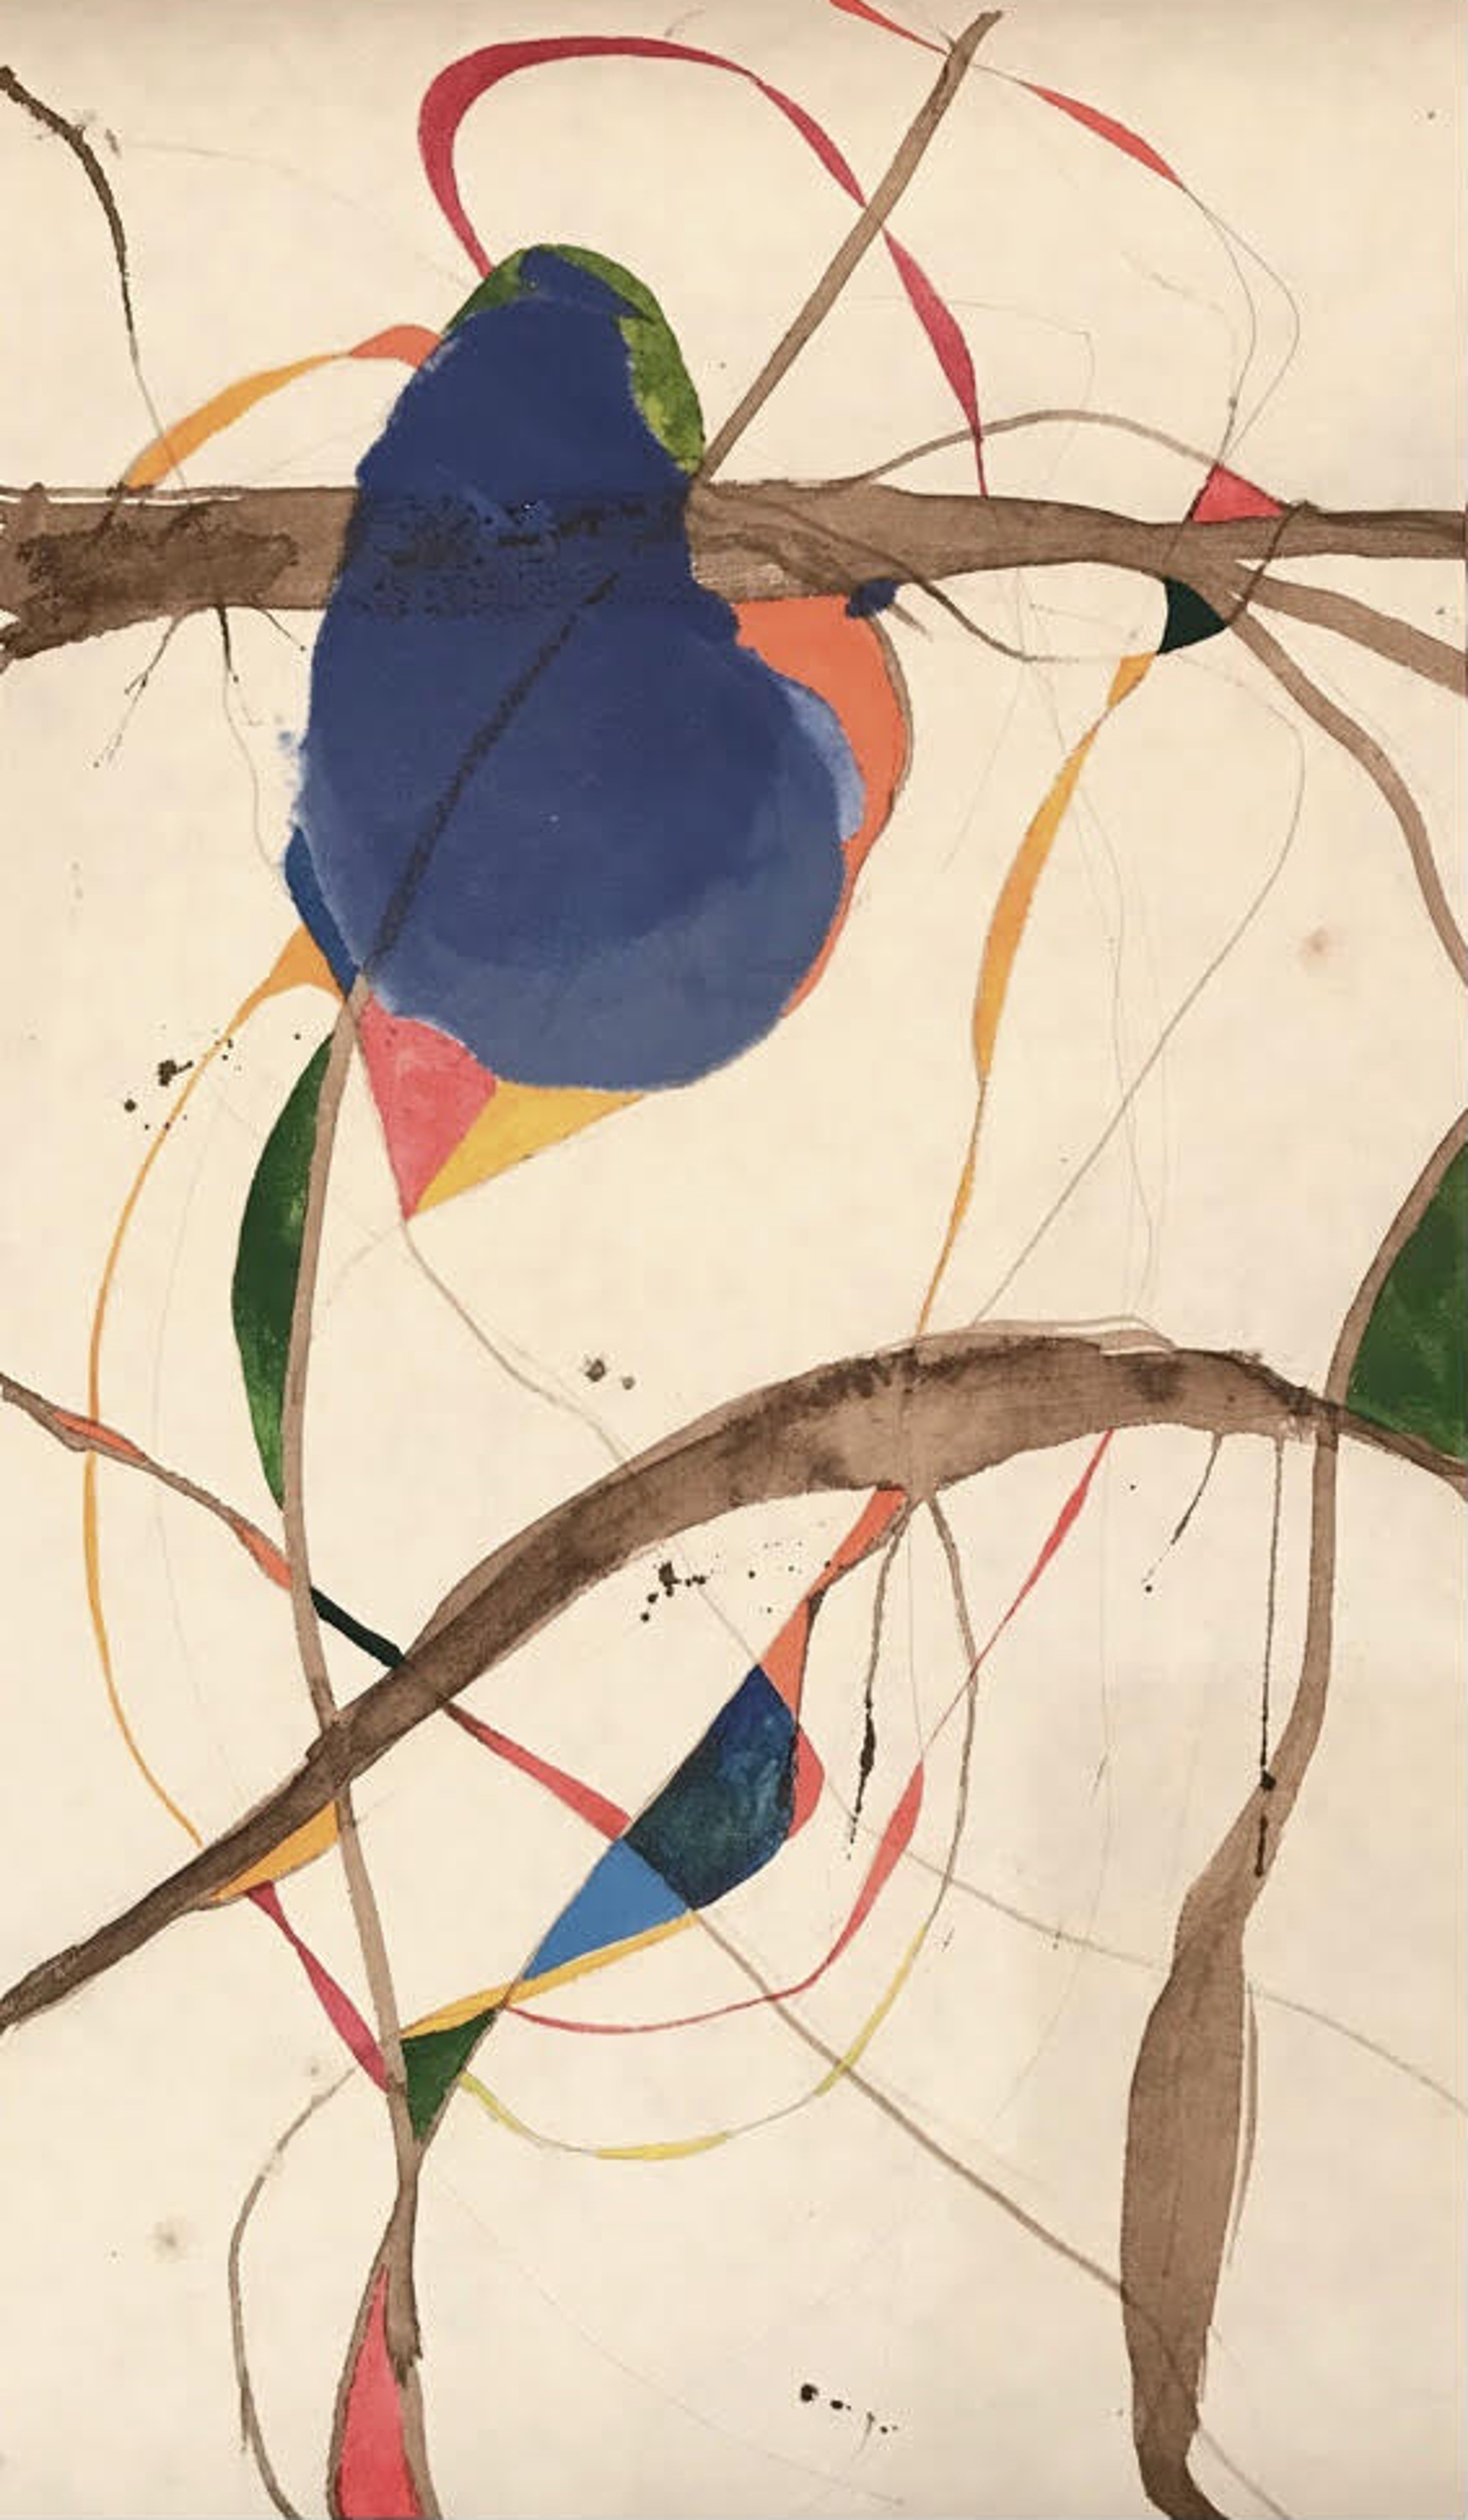 Untitled 3 by Tracey Adams